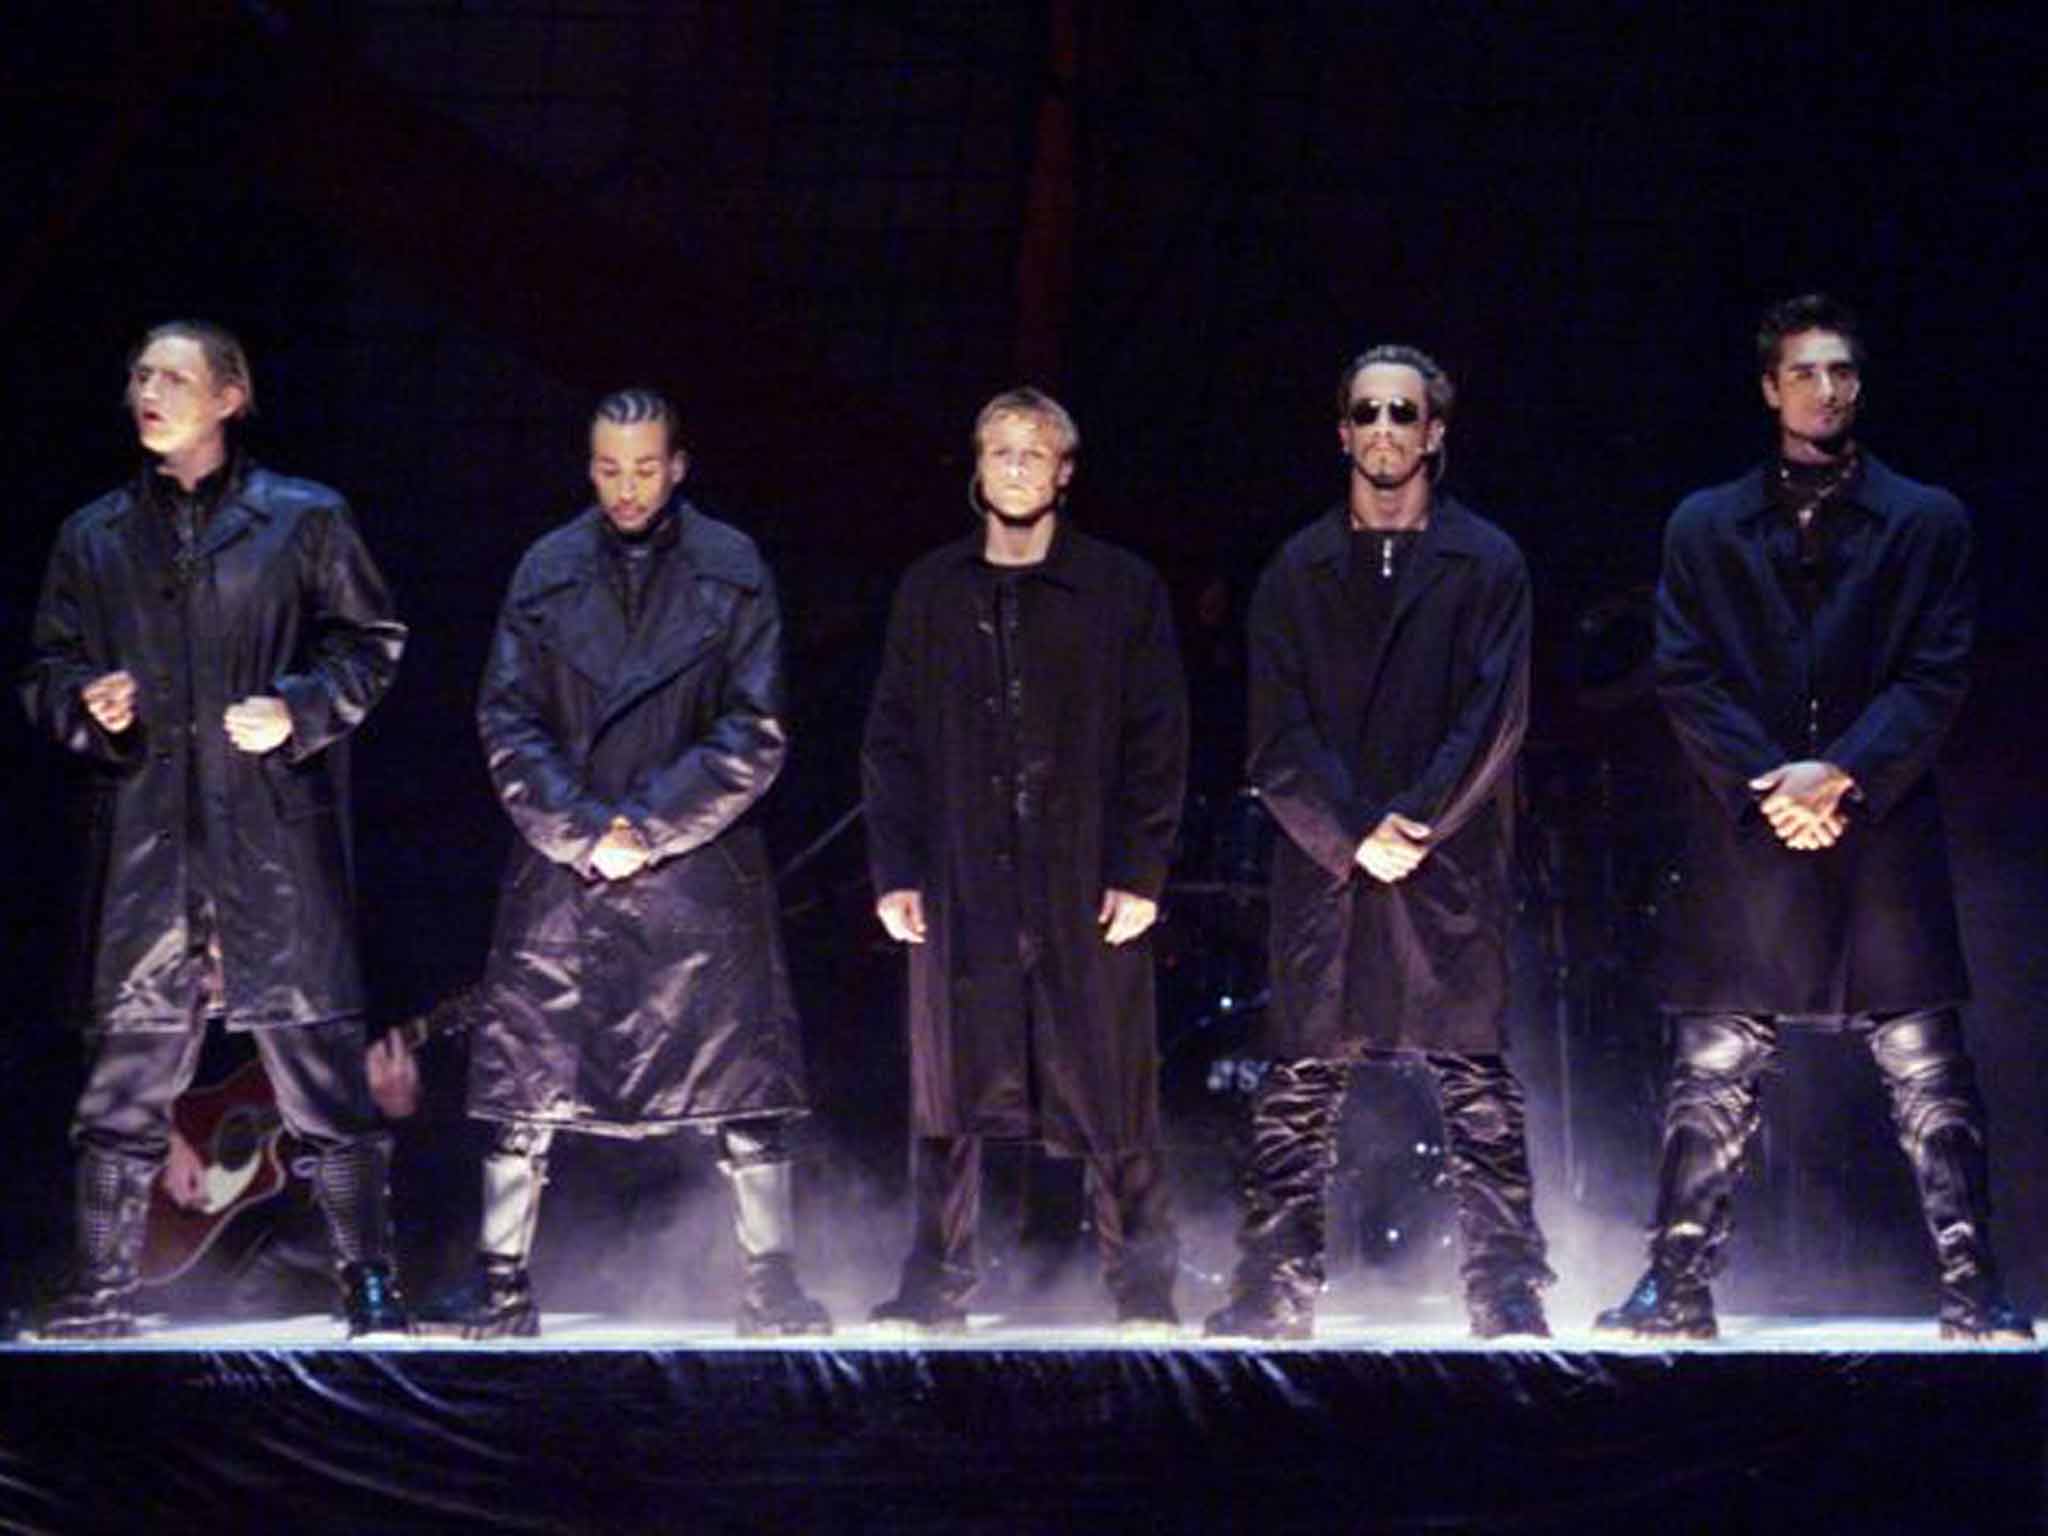 The Backstreet Boys in their prime at the 1999 MTV Video Music Awards